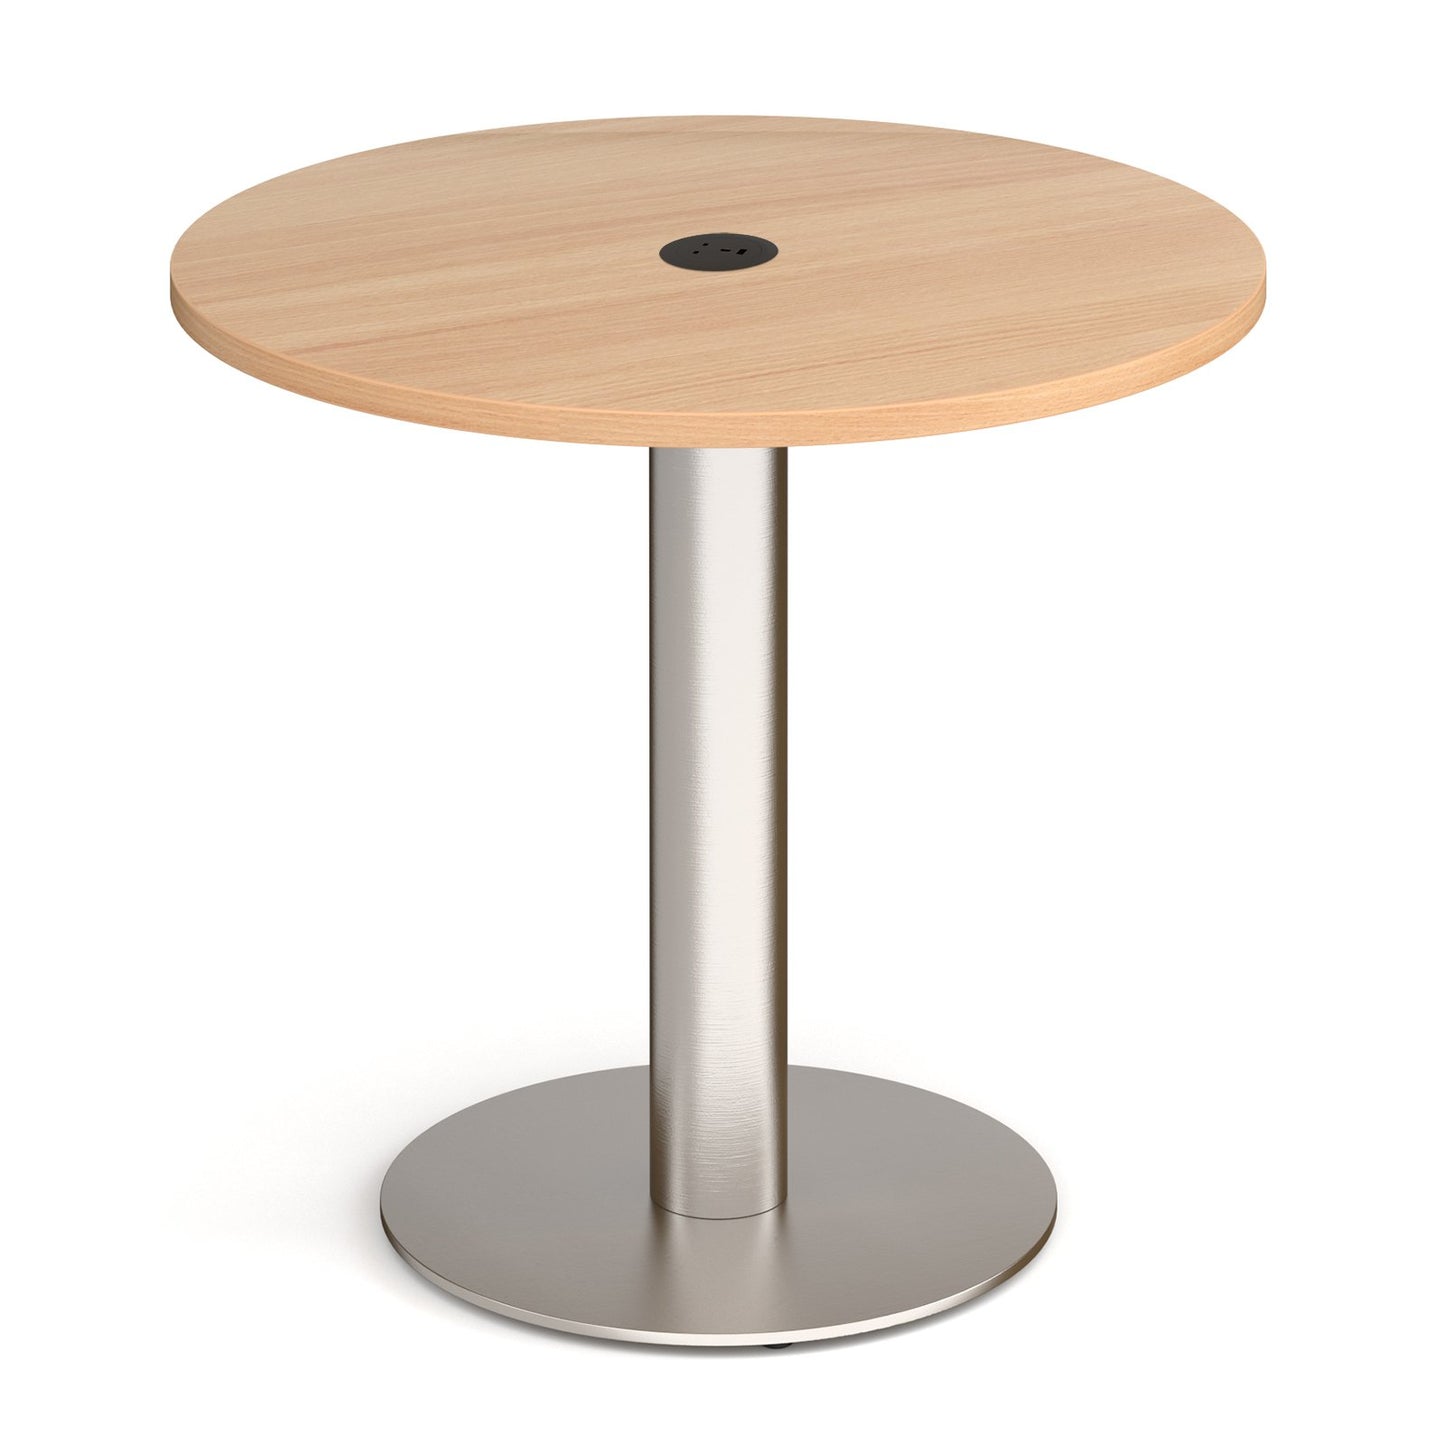 Monza circular dining table with power module